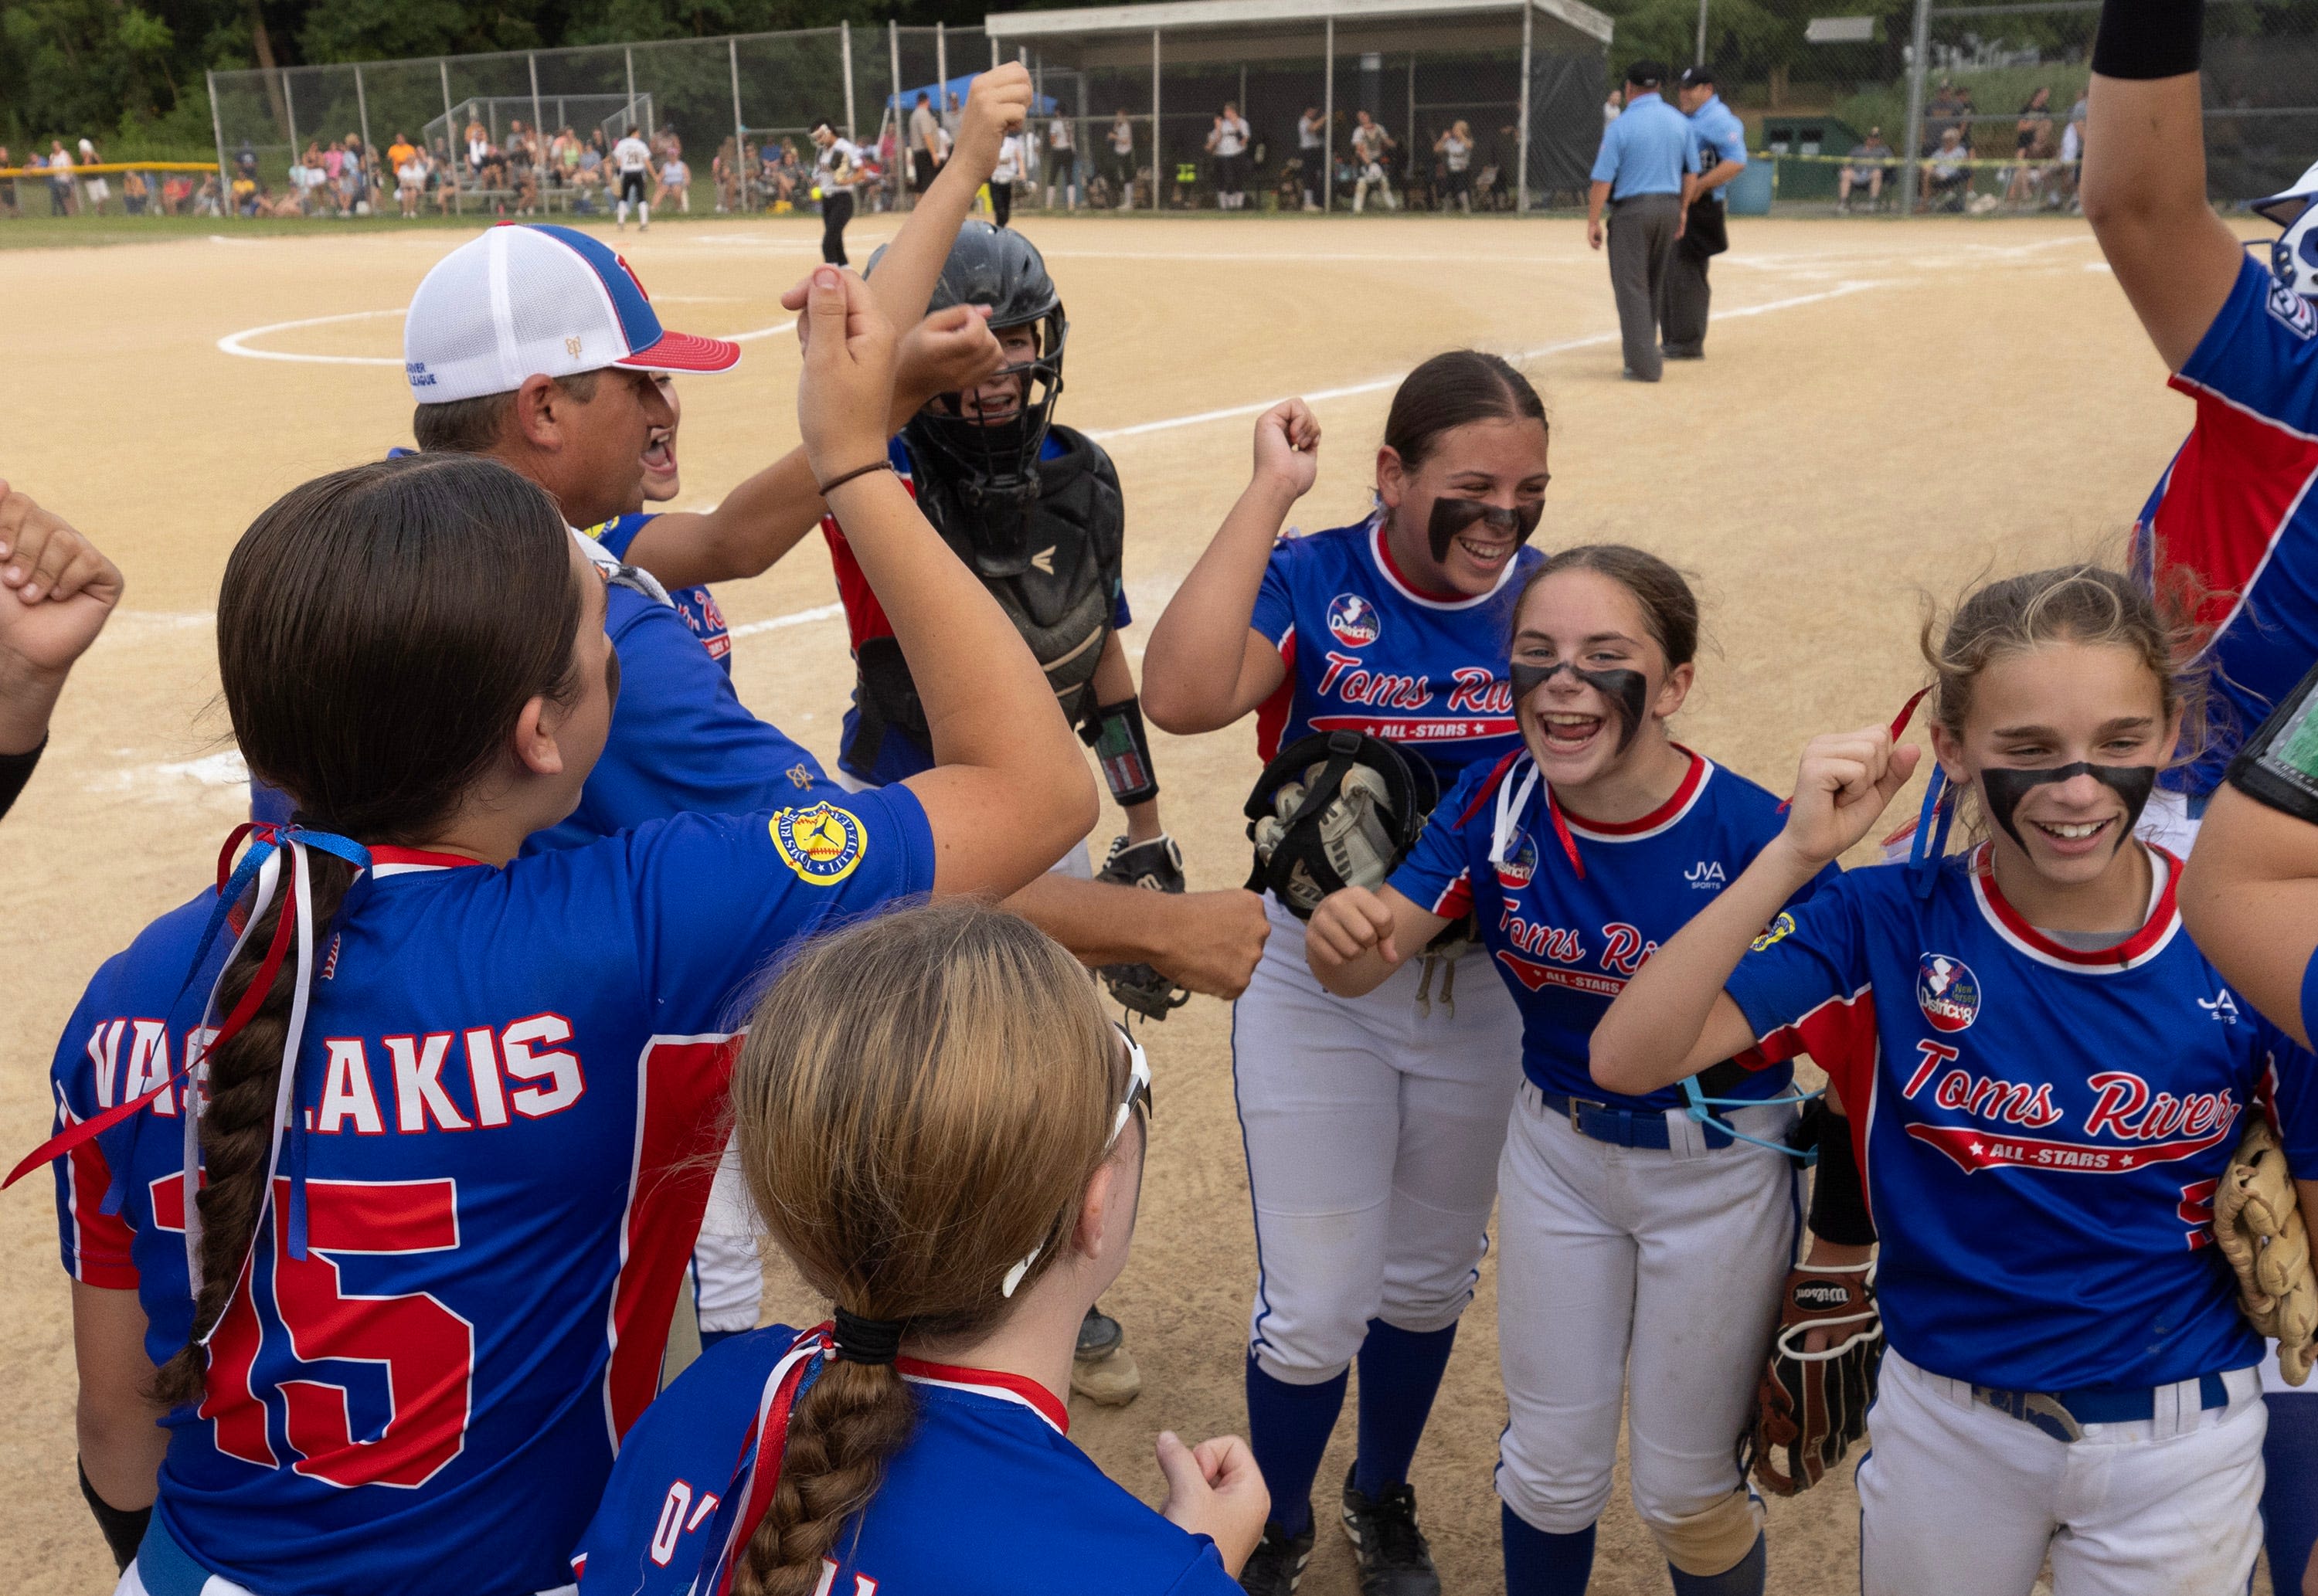 Toms River Little League softball, overcoming adversity, is going to the state tournament